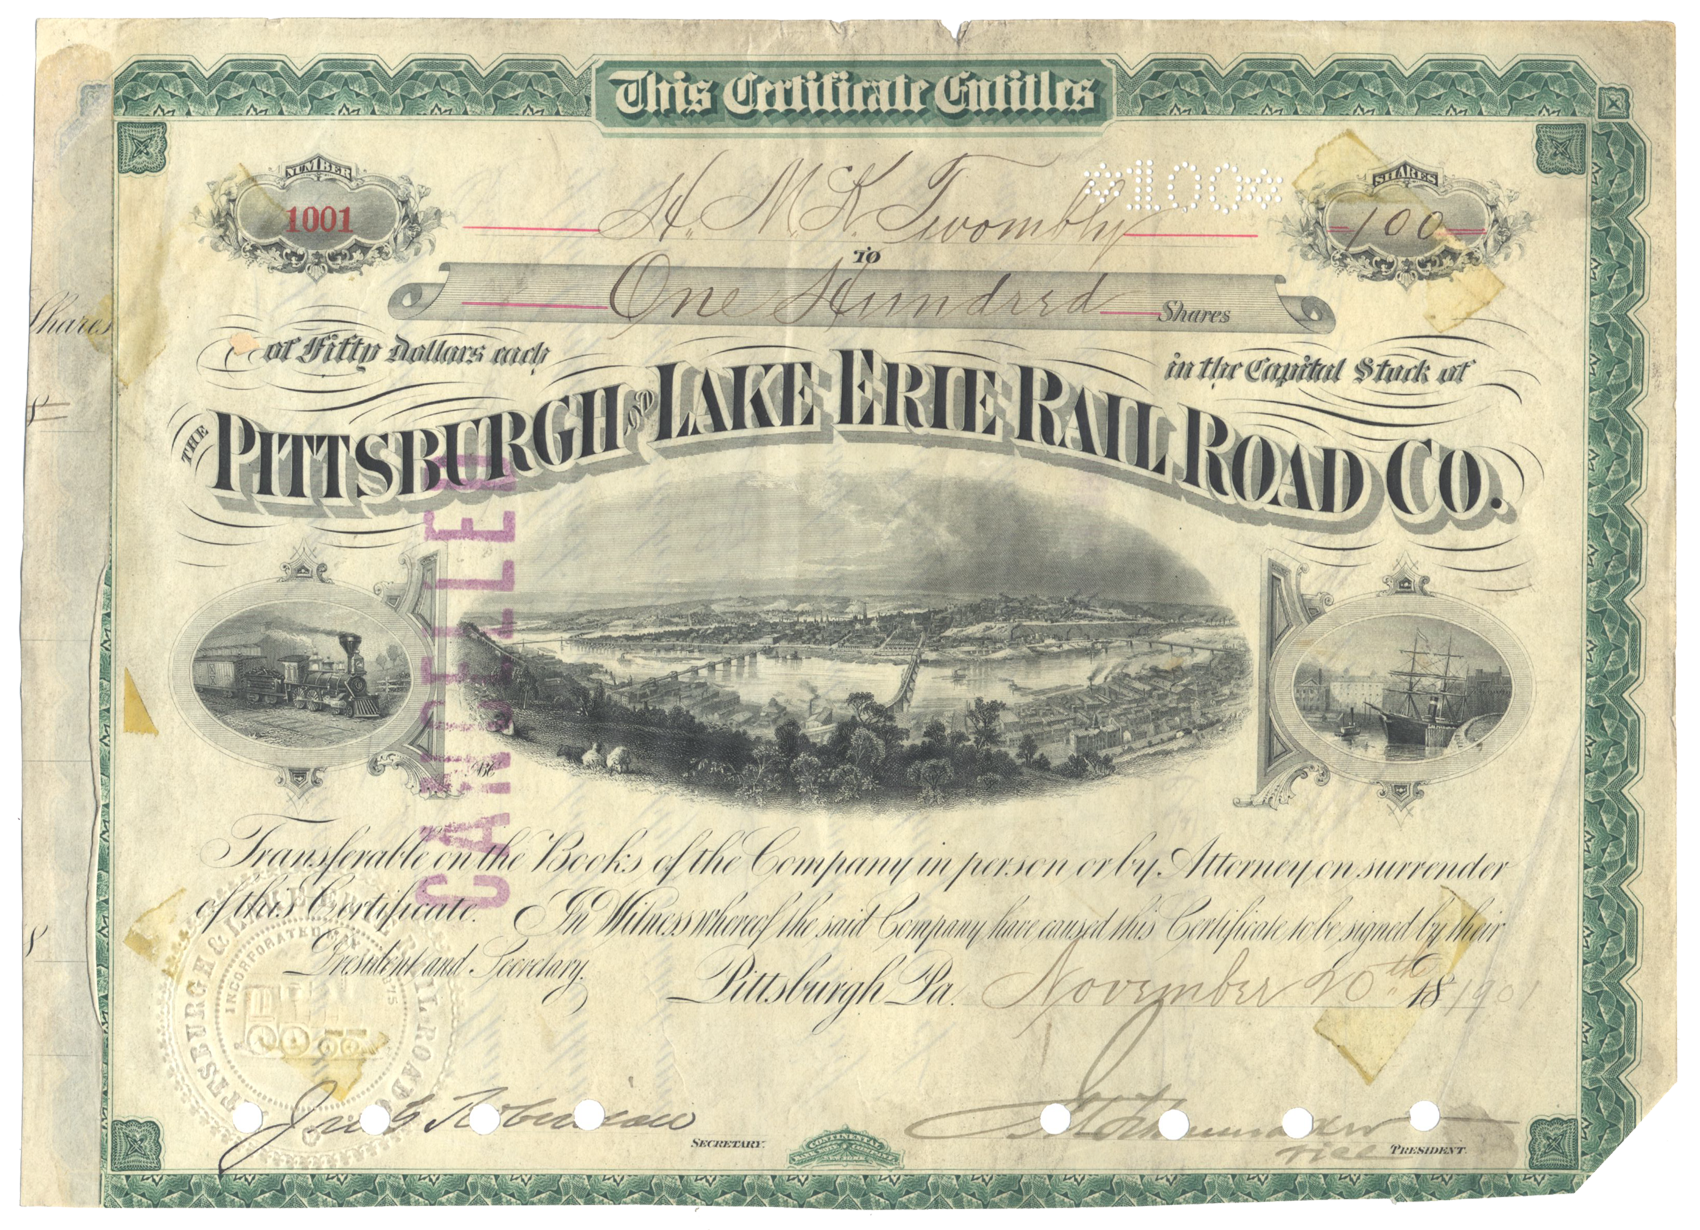 Pittsburgh and Lake Erie Railroad Company Stock Certificate Issued to Hamilton McKown Twombly